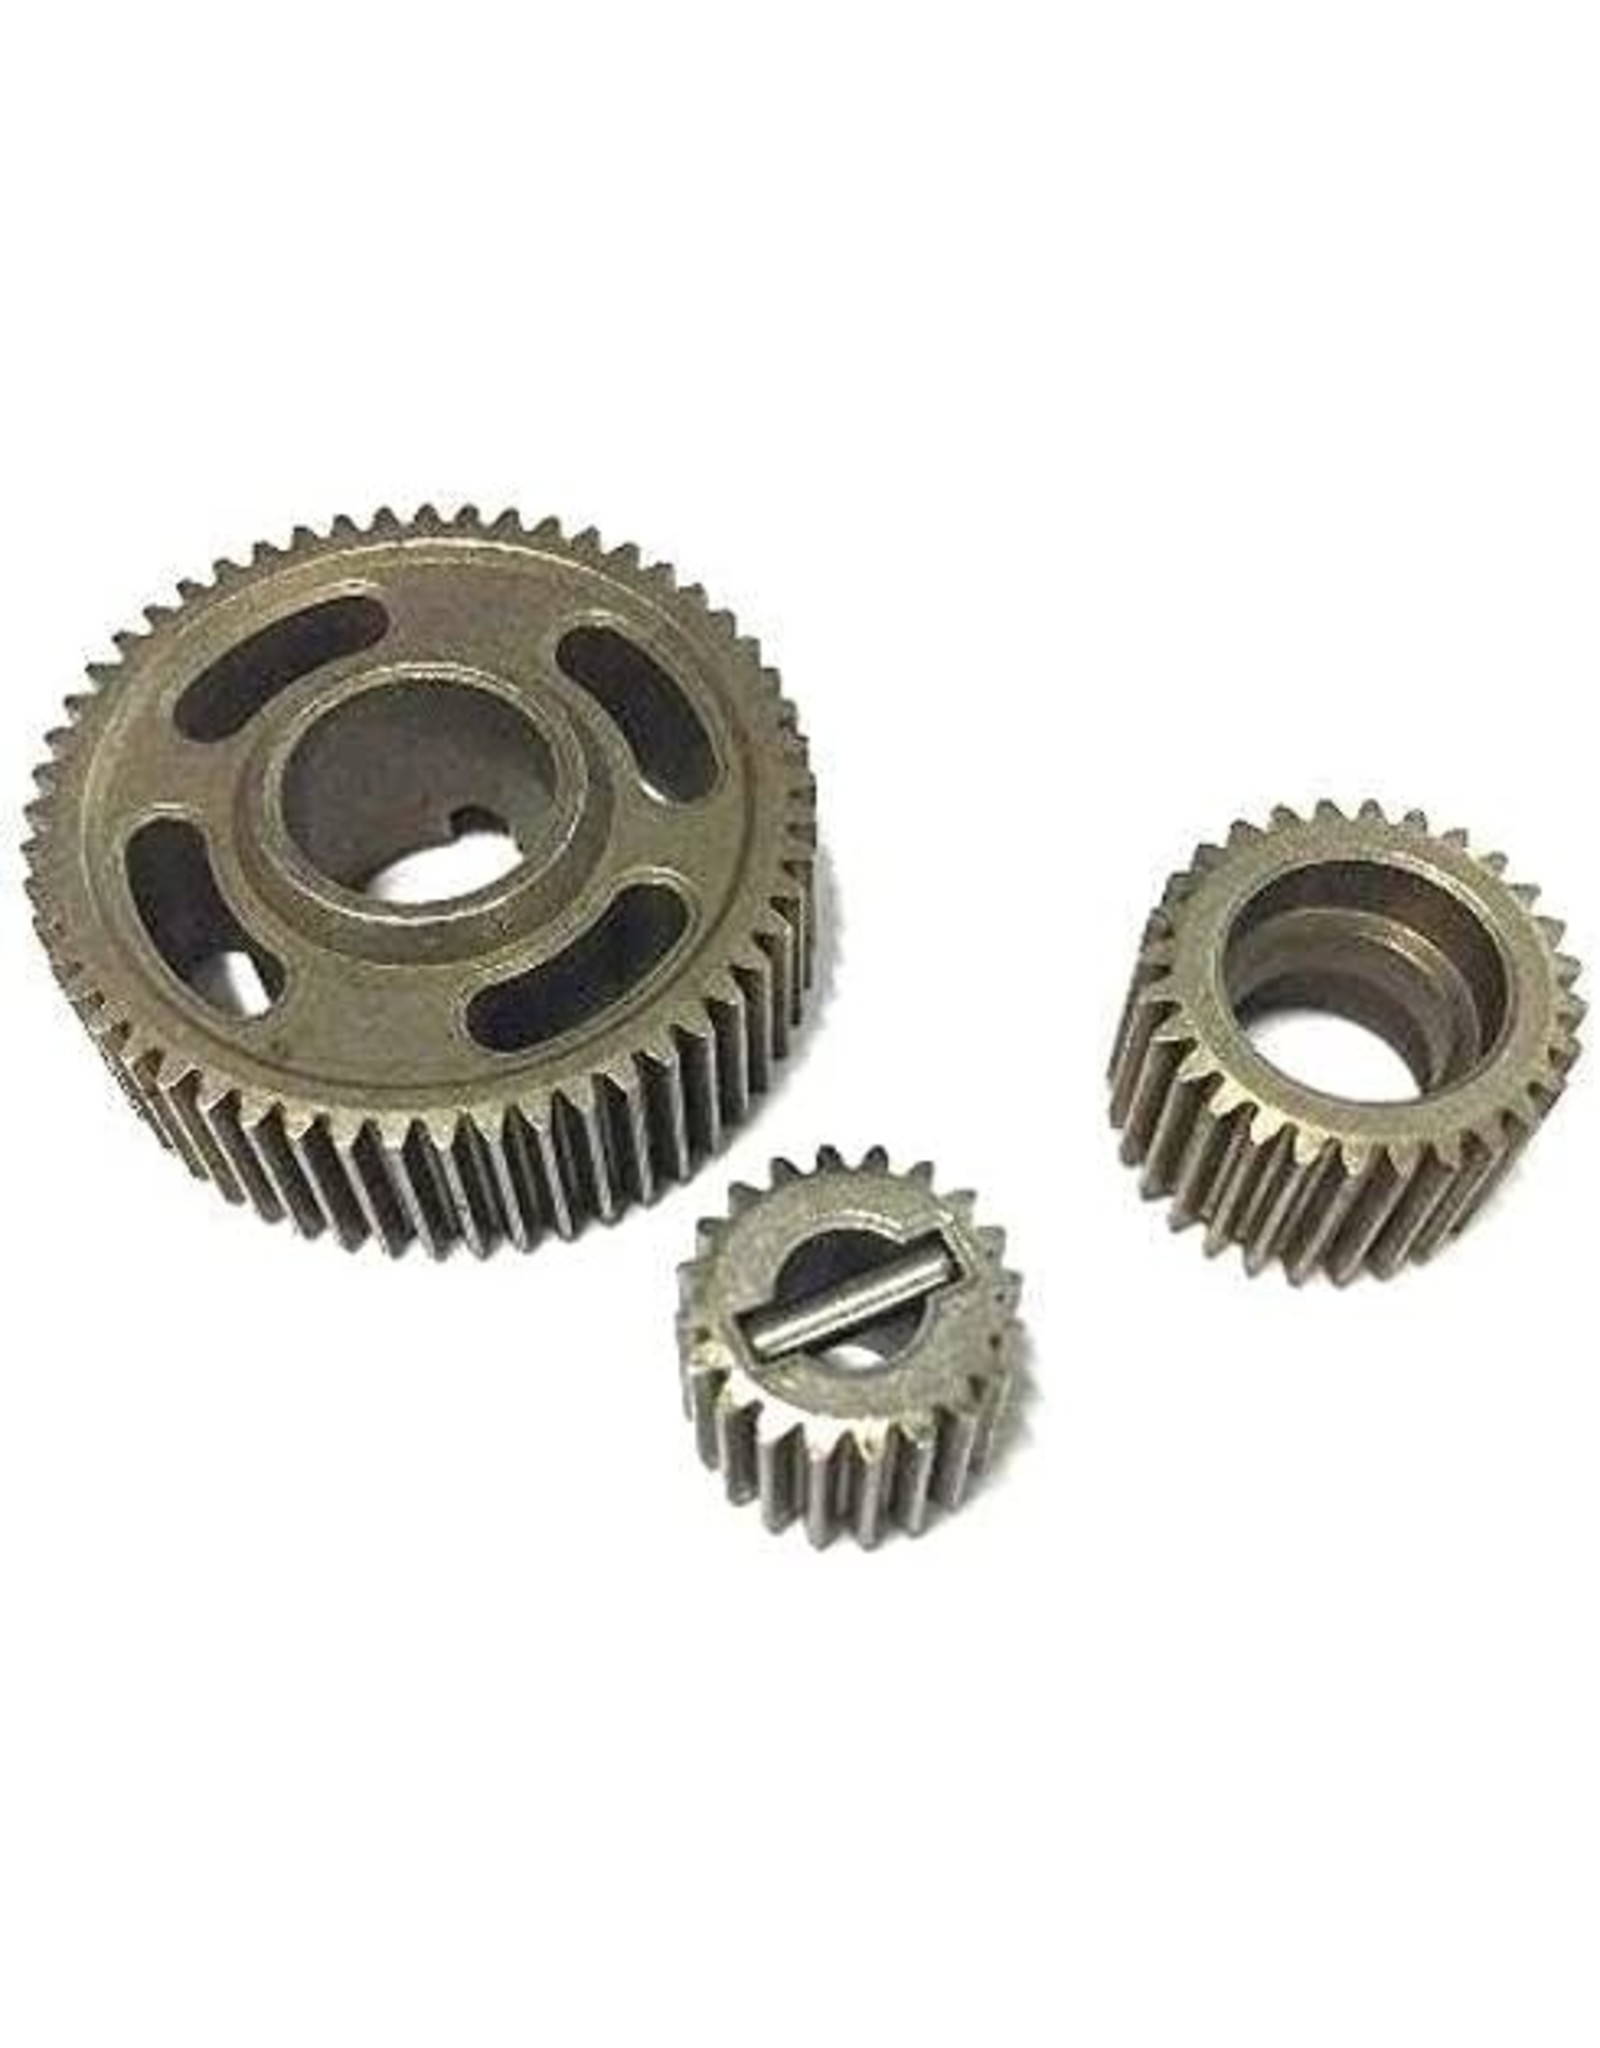 Redcat Racing Steel transmission gear set (20T, 28T, 53T) and pin (1set)